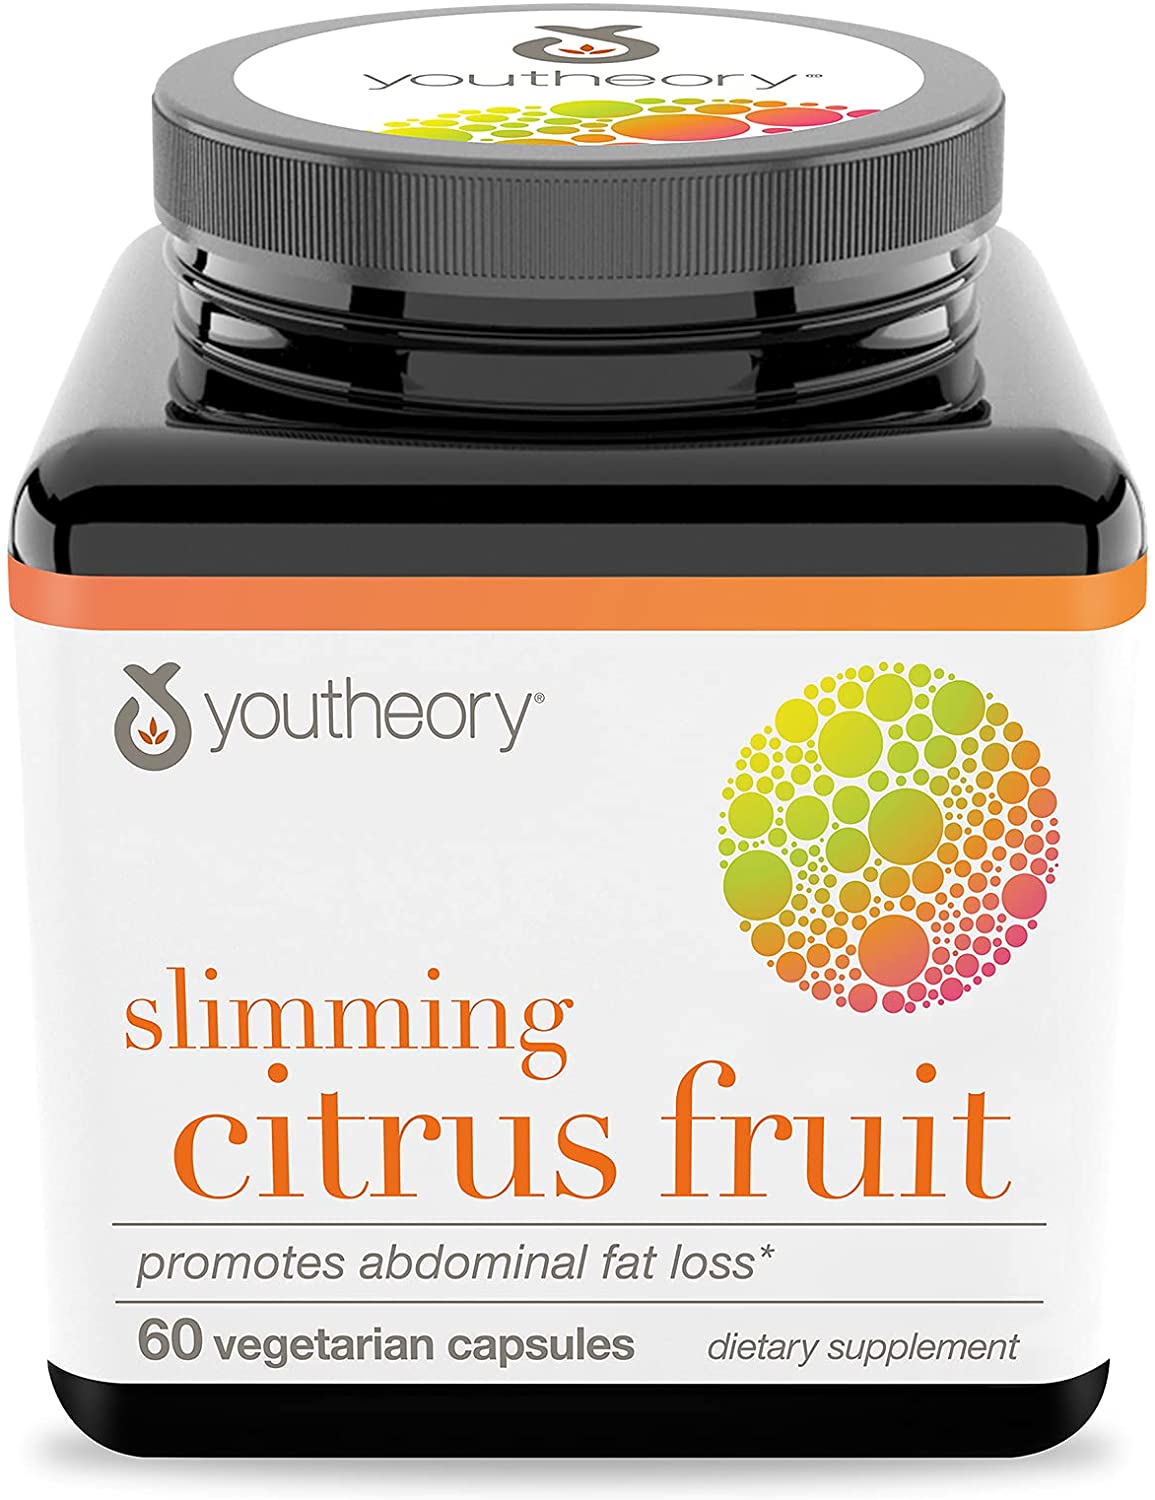 Youtheory Slimming Citrus Fruit Advanced - 60 Tablet